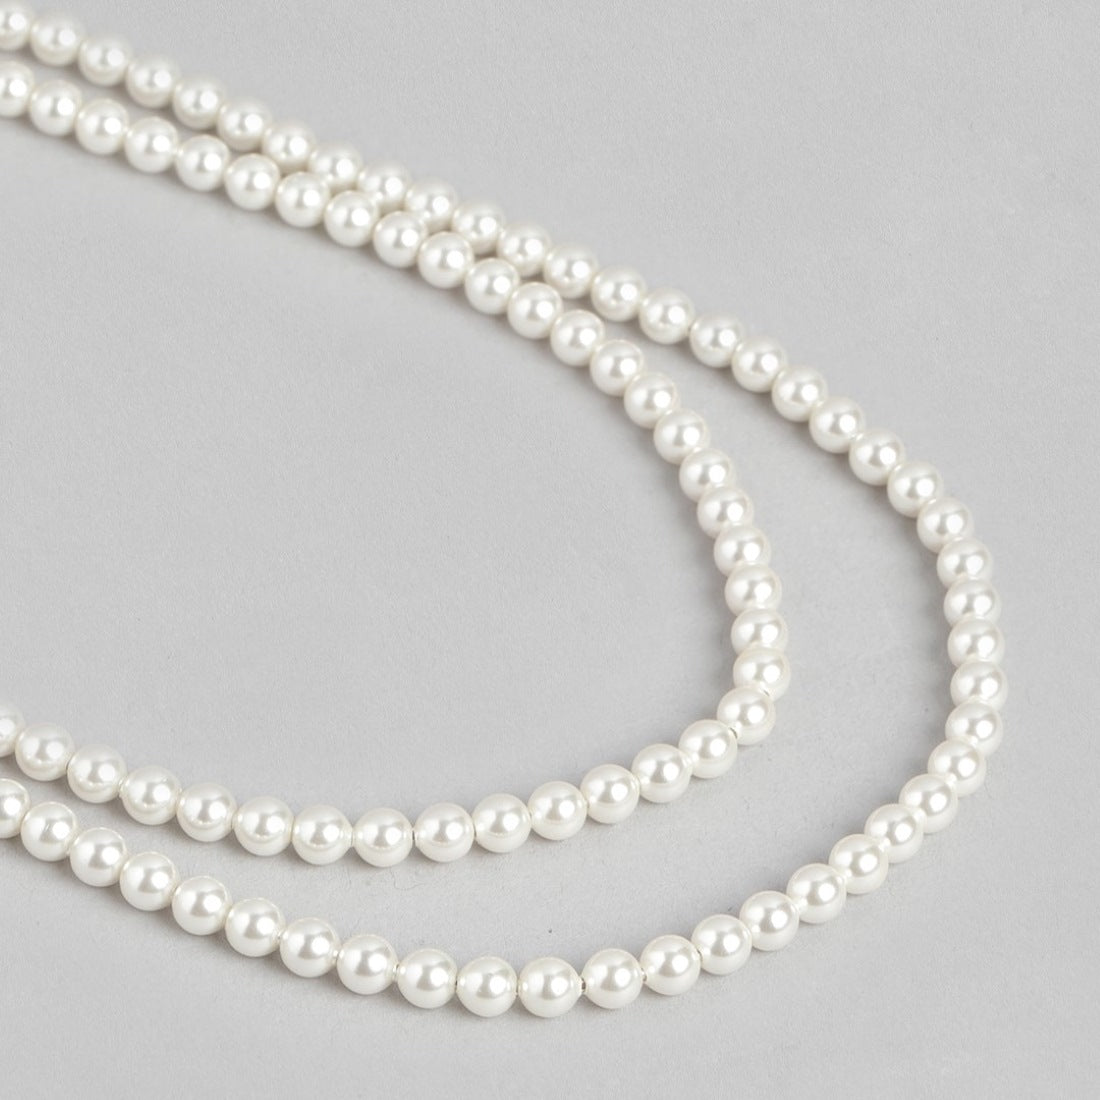 Lustrous Dual Layers Rhodium-Plated 925 Sterling Silver Freshwater Pearl Necklace